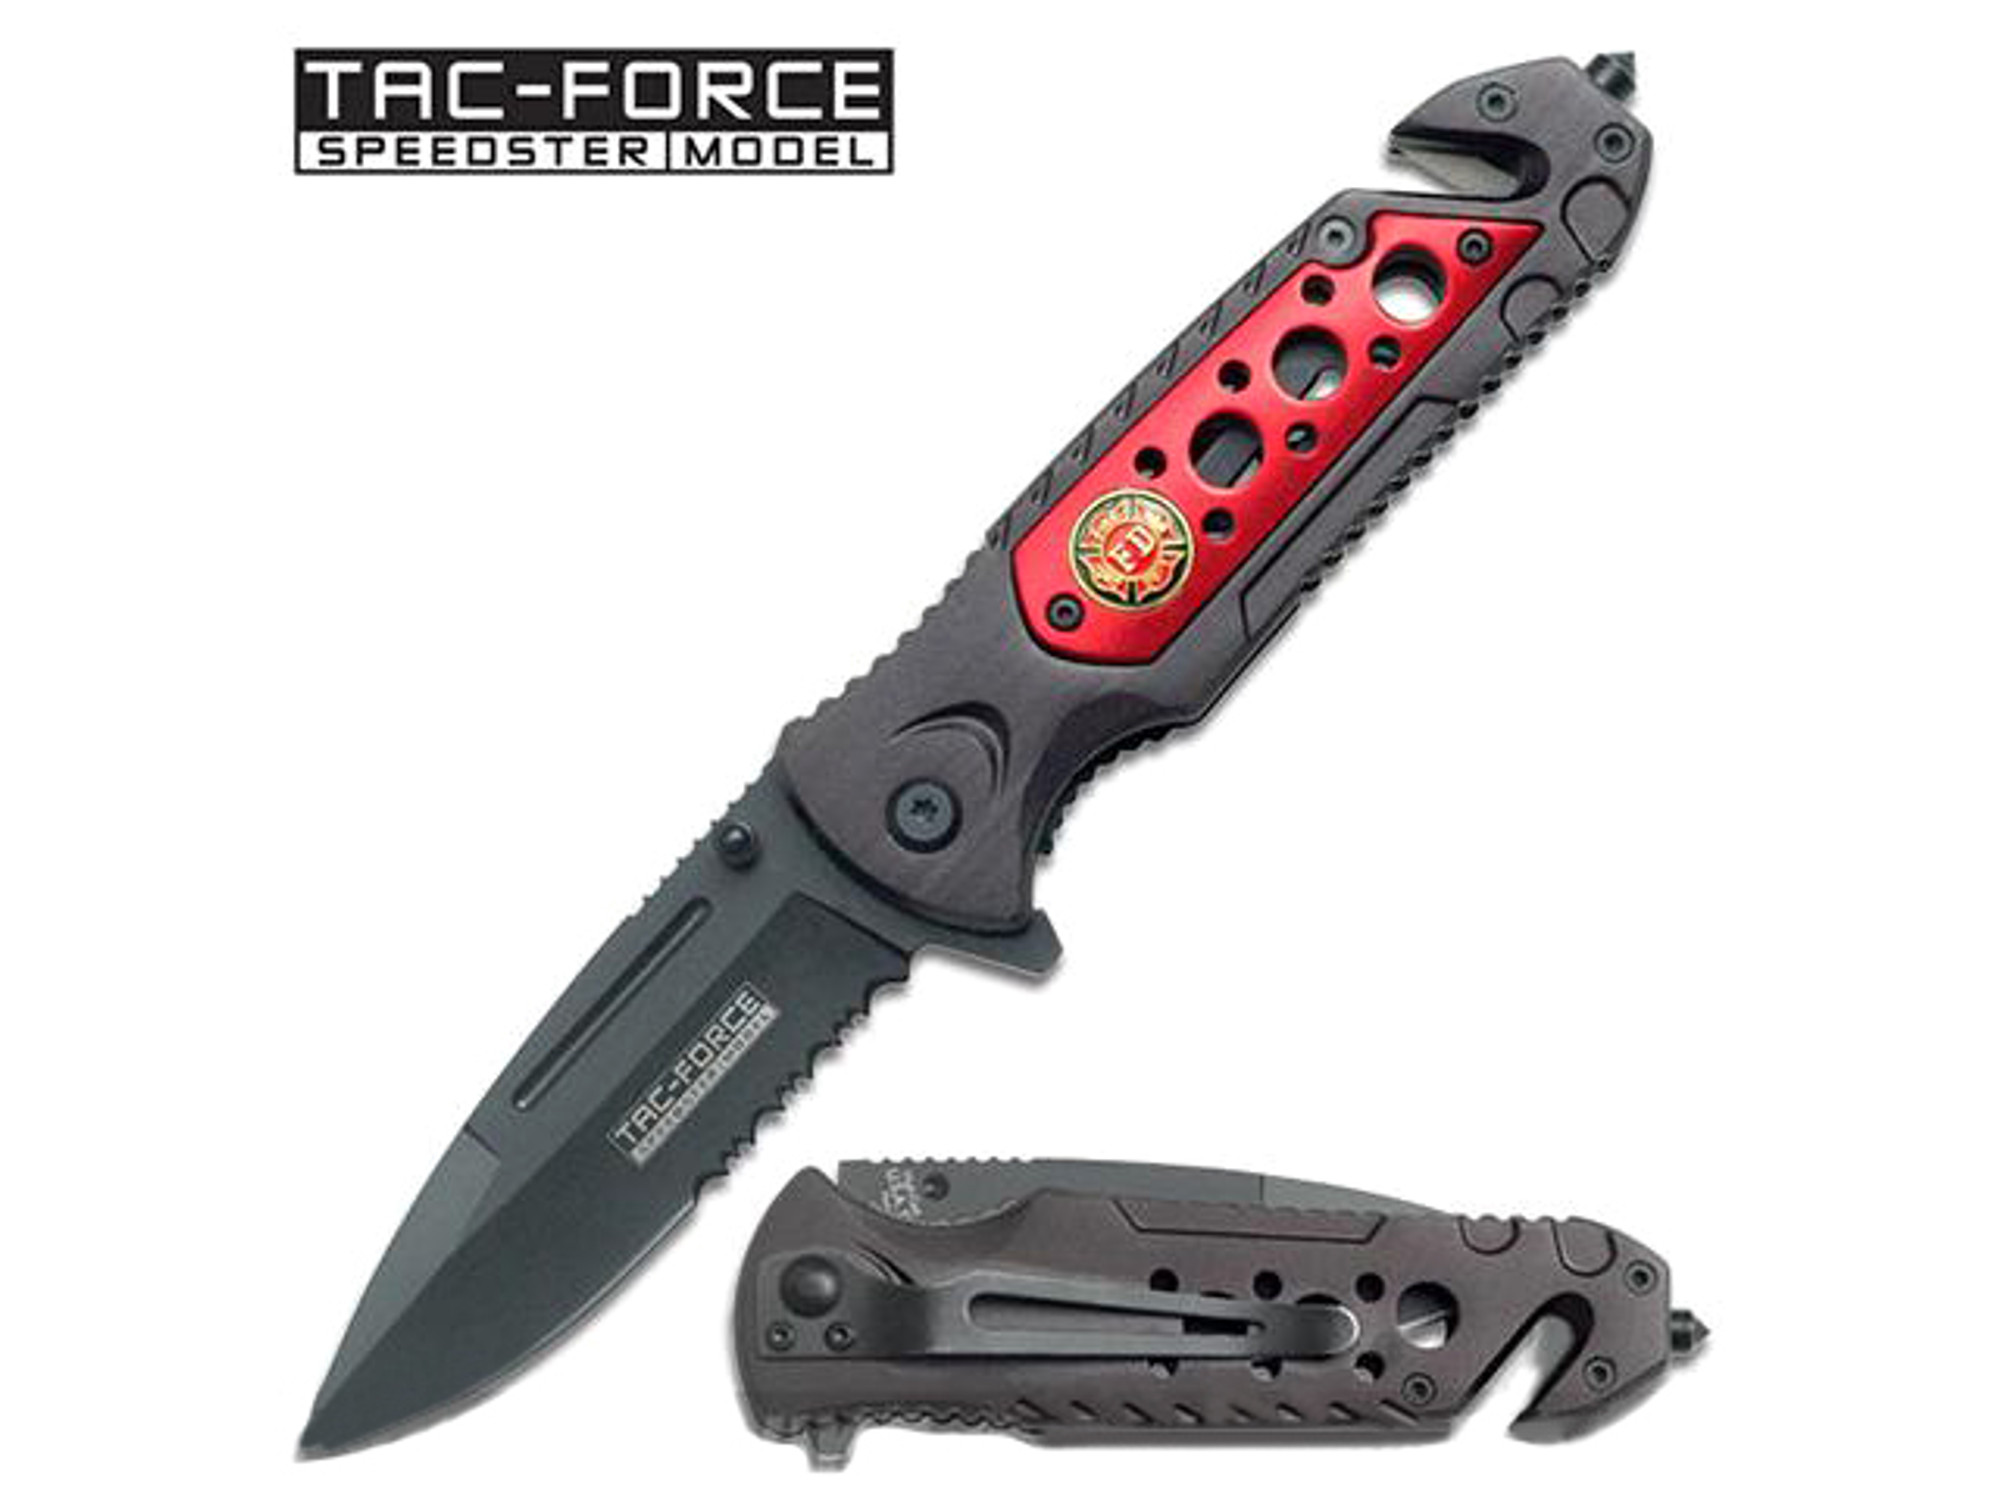 4.5" Tac-Force Rescue Folder with Seatbelt Cutter - Firefighter Red